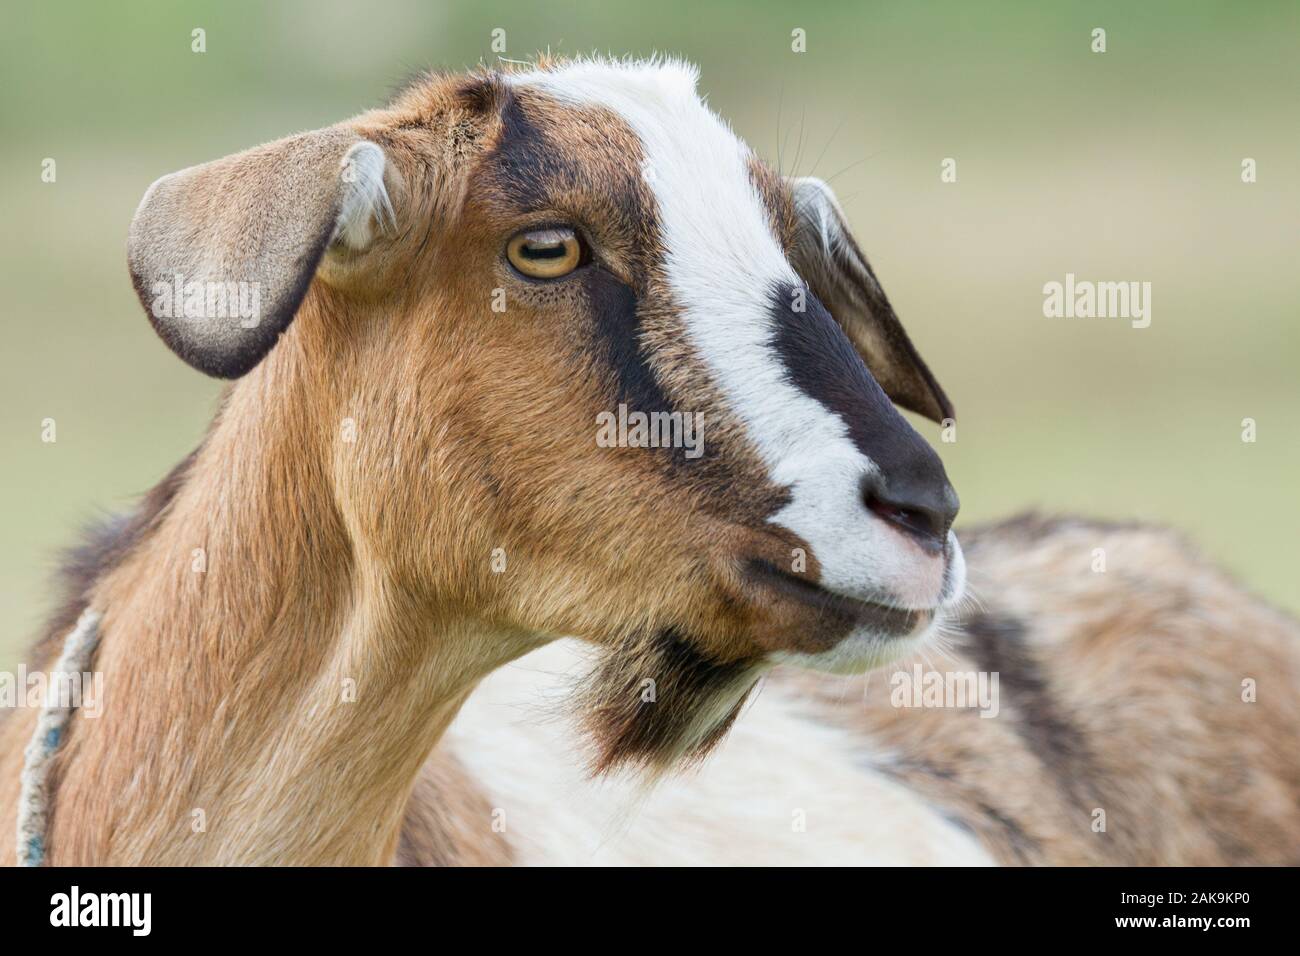 goat head with no horns Stock Photo